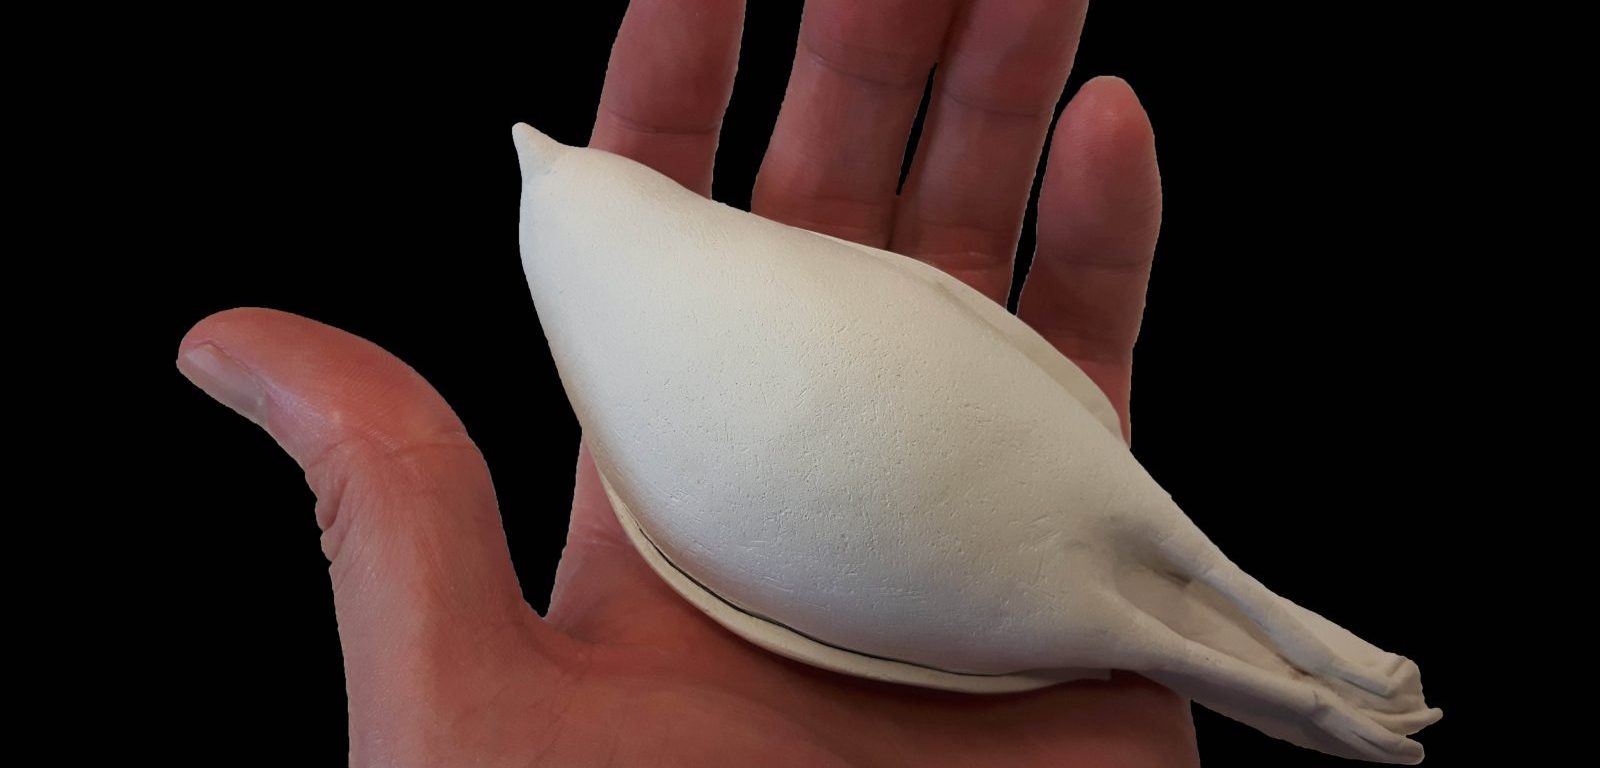 A hand holds a bird sculpture made of white clay. The hand belongs to a white male